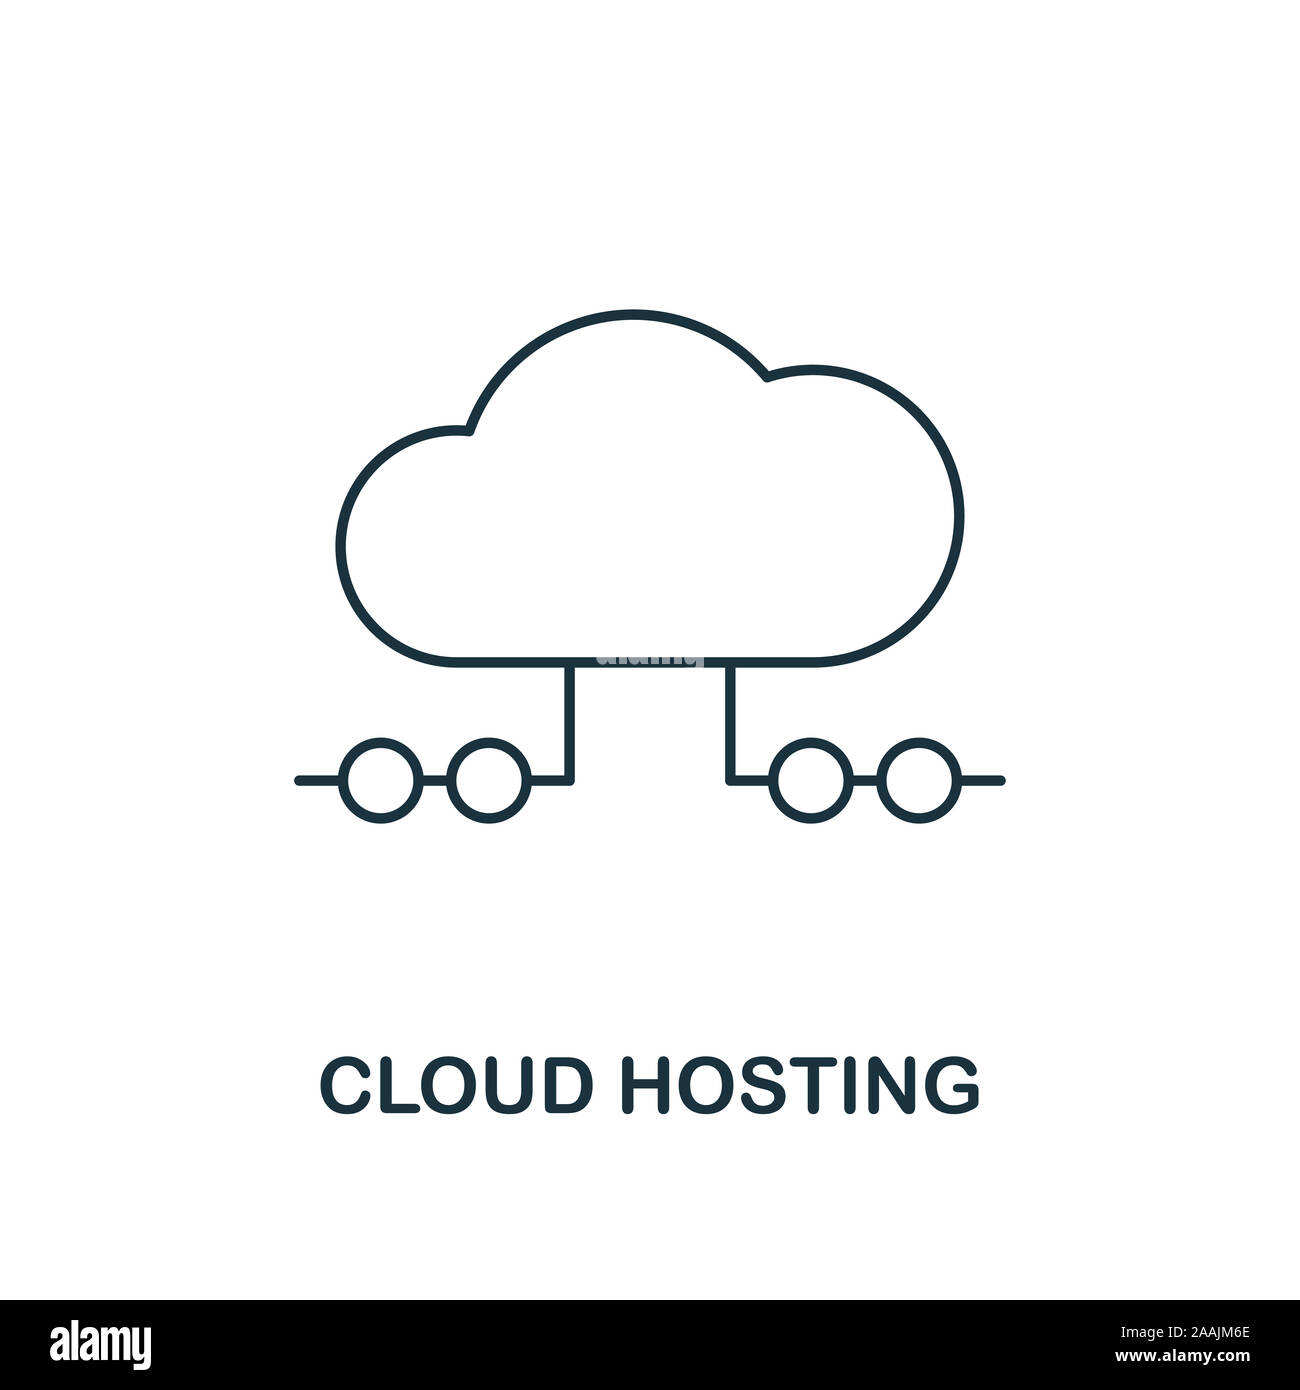 Cloud Hosting outline icon. Thin line style from big data icons collection. Pixel perfect simple element cloud hosting icon for web design, apps Stock Photo